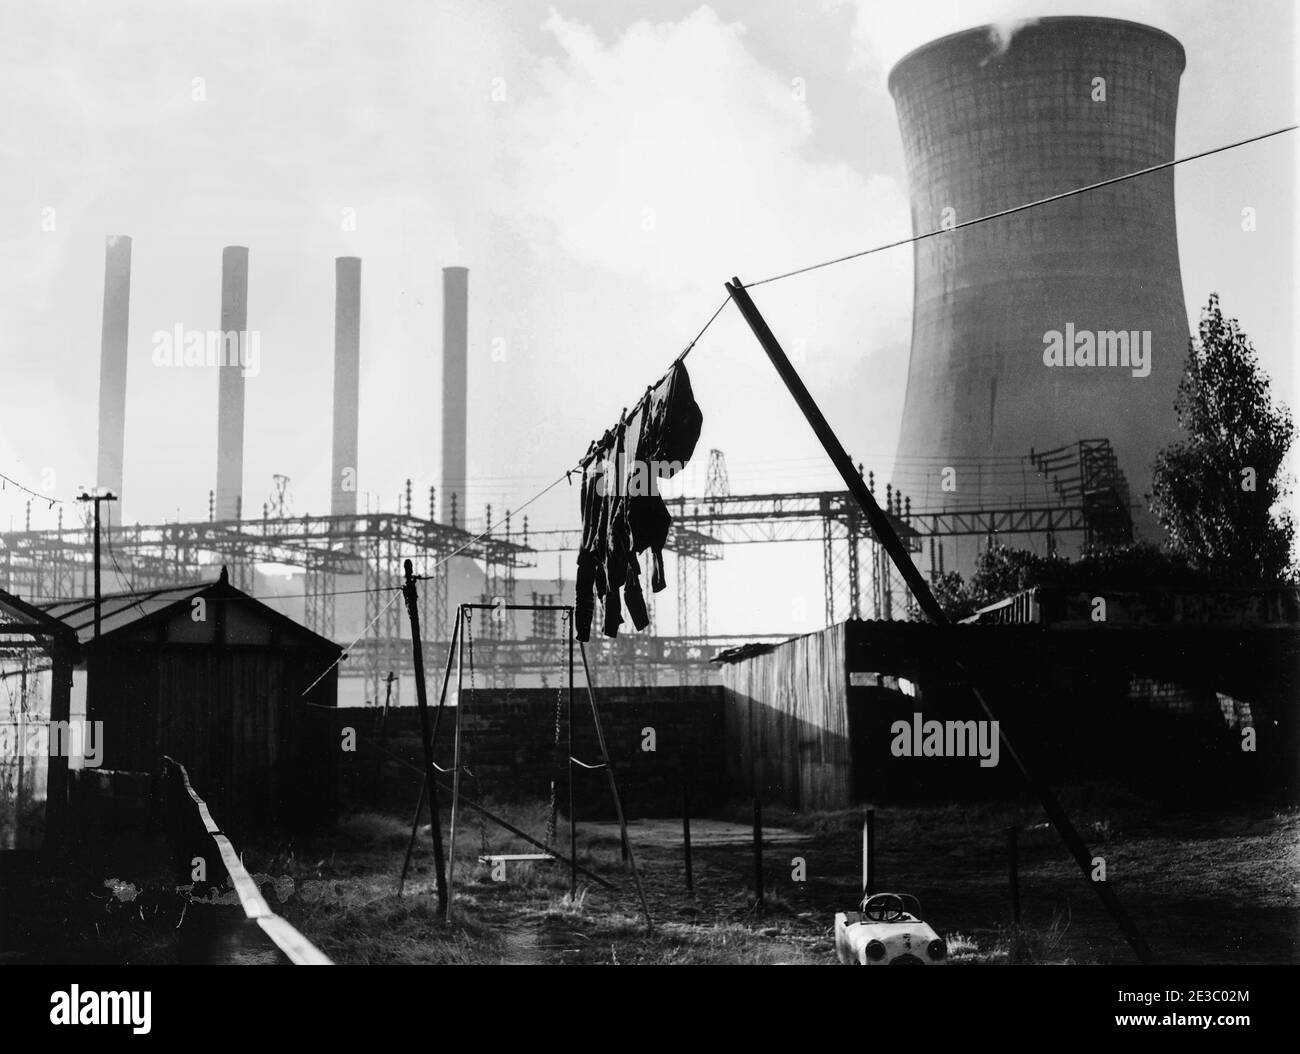 Ocker Hill Power Station situated at Ocker Hill in Tipton, West Midlands in 1957 Britain England Uk 1950s industrial scene working class area Stock Photo